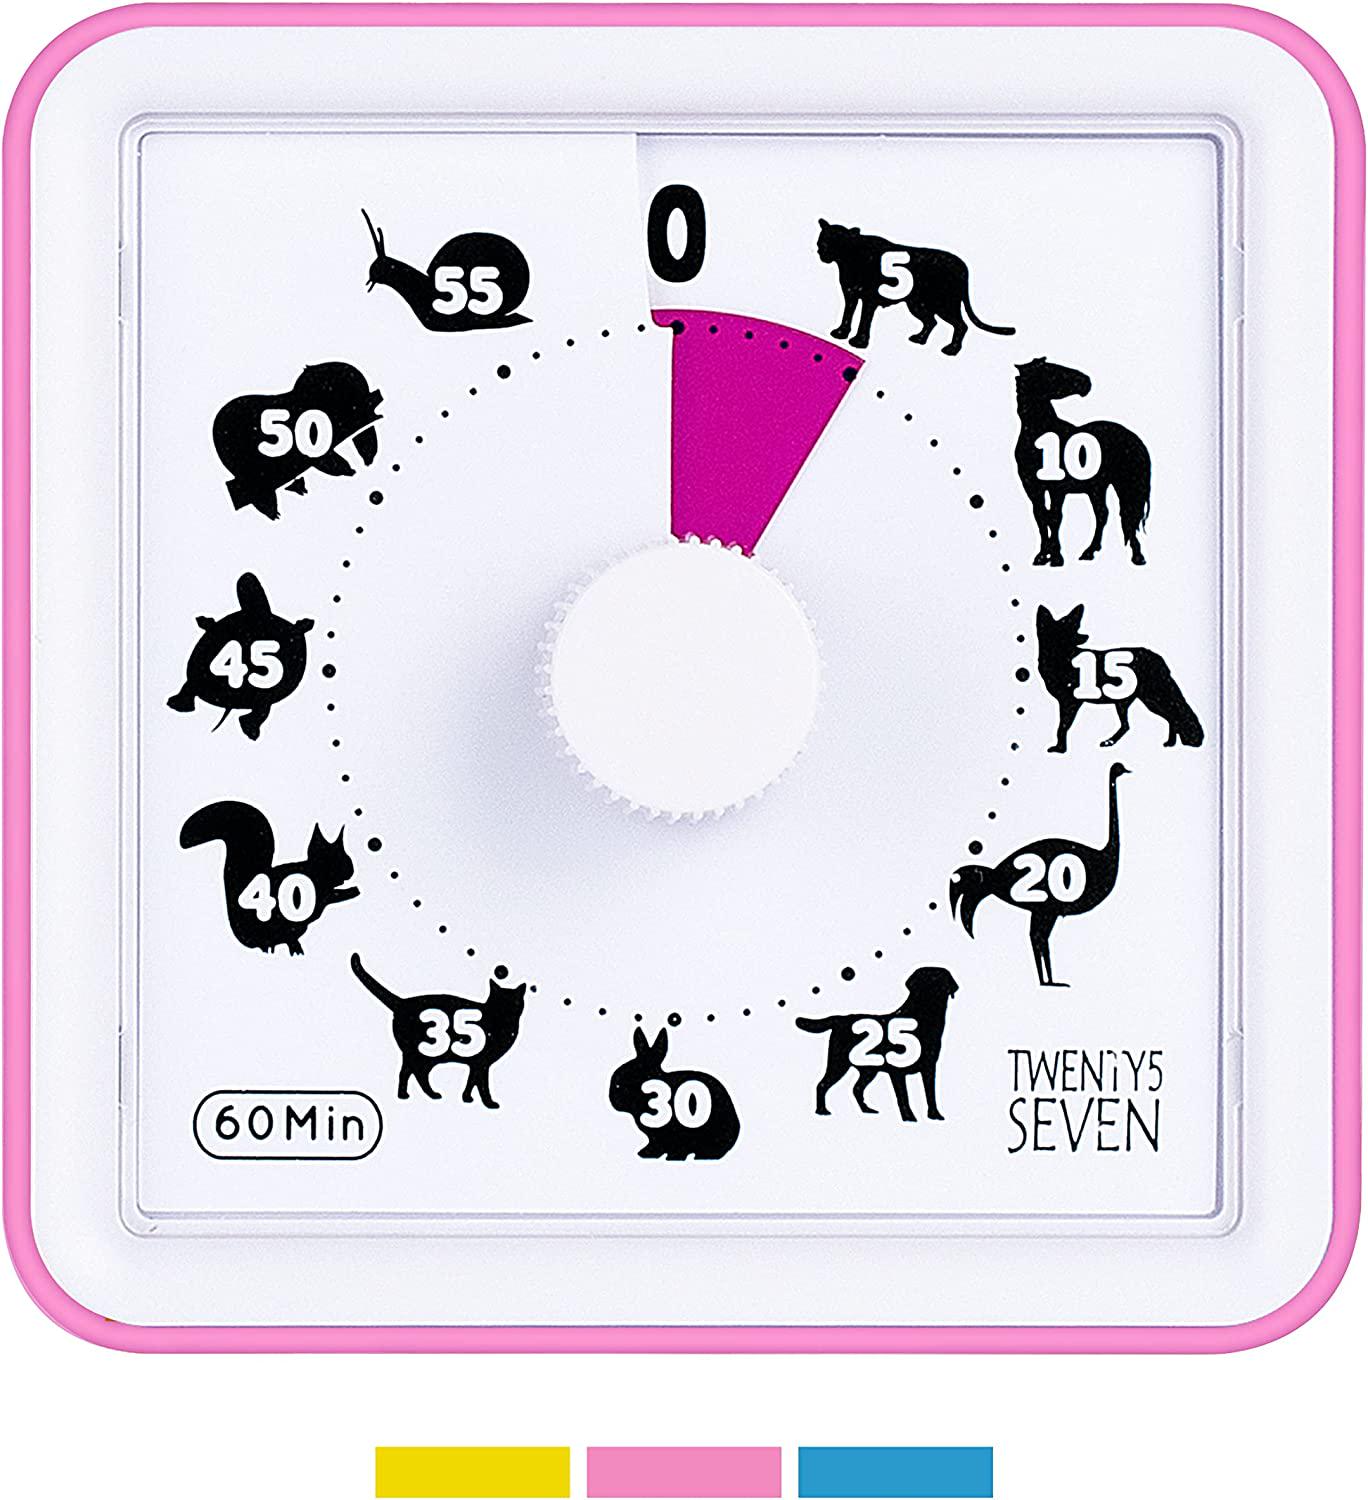 TWENTY5 SEVEN, TWENTY5 SEVEN Countdown Timer 3 inch; 60 Minute 1 Hour Visual Timer - Classroom Teaching Tool Office Meeting, Countdown Clock for Kids Exam Time Management - Pink